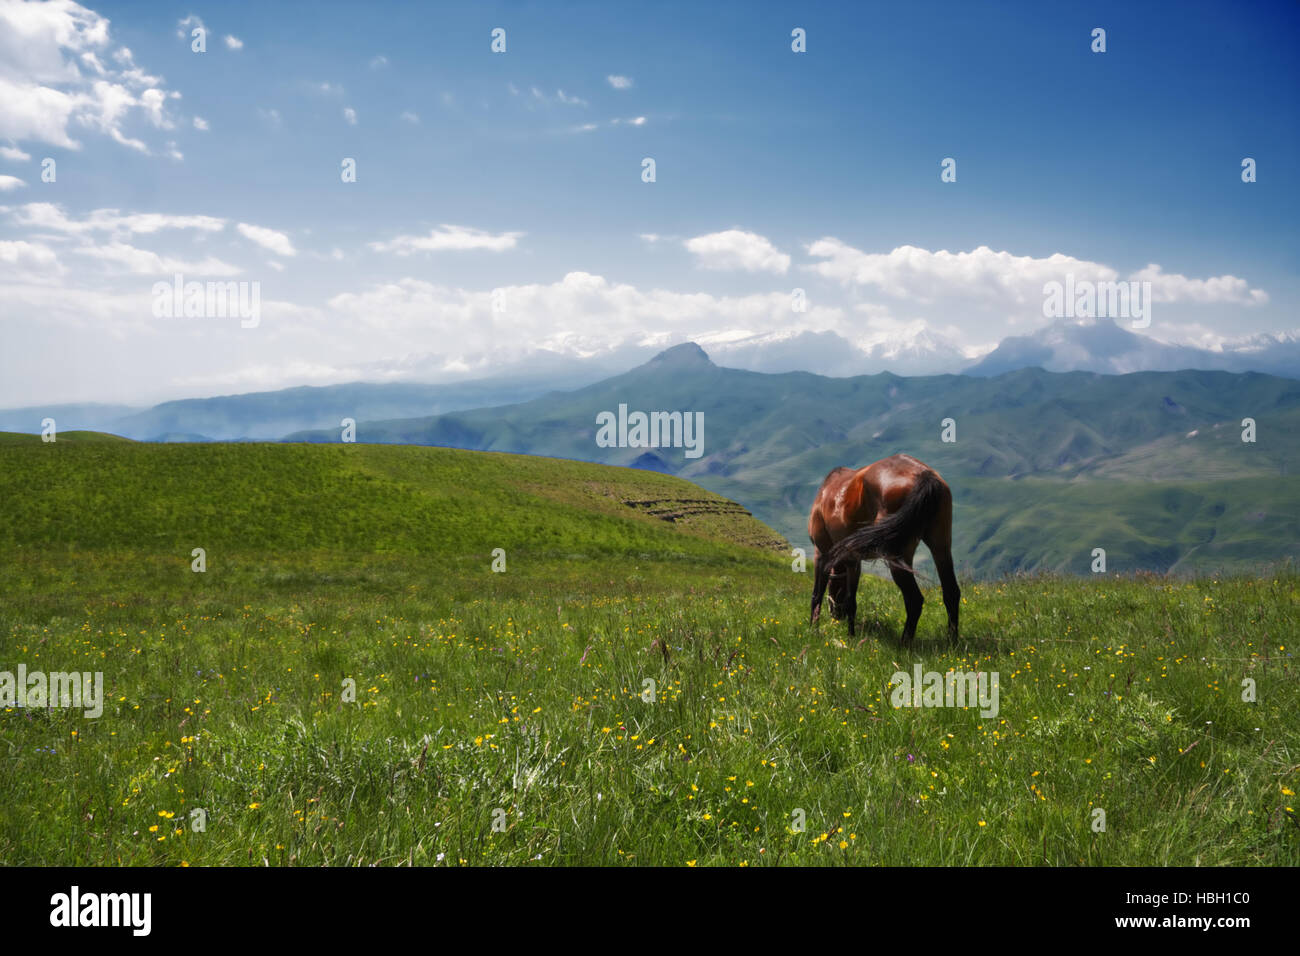 Mountain landscape with a horse Stock Photo